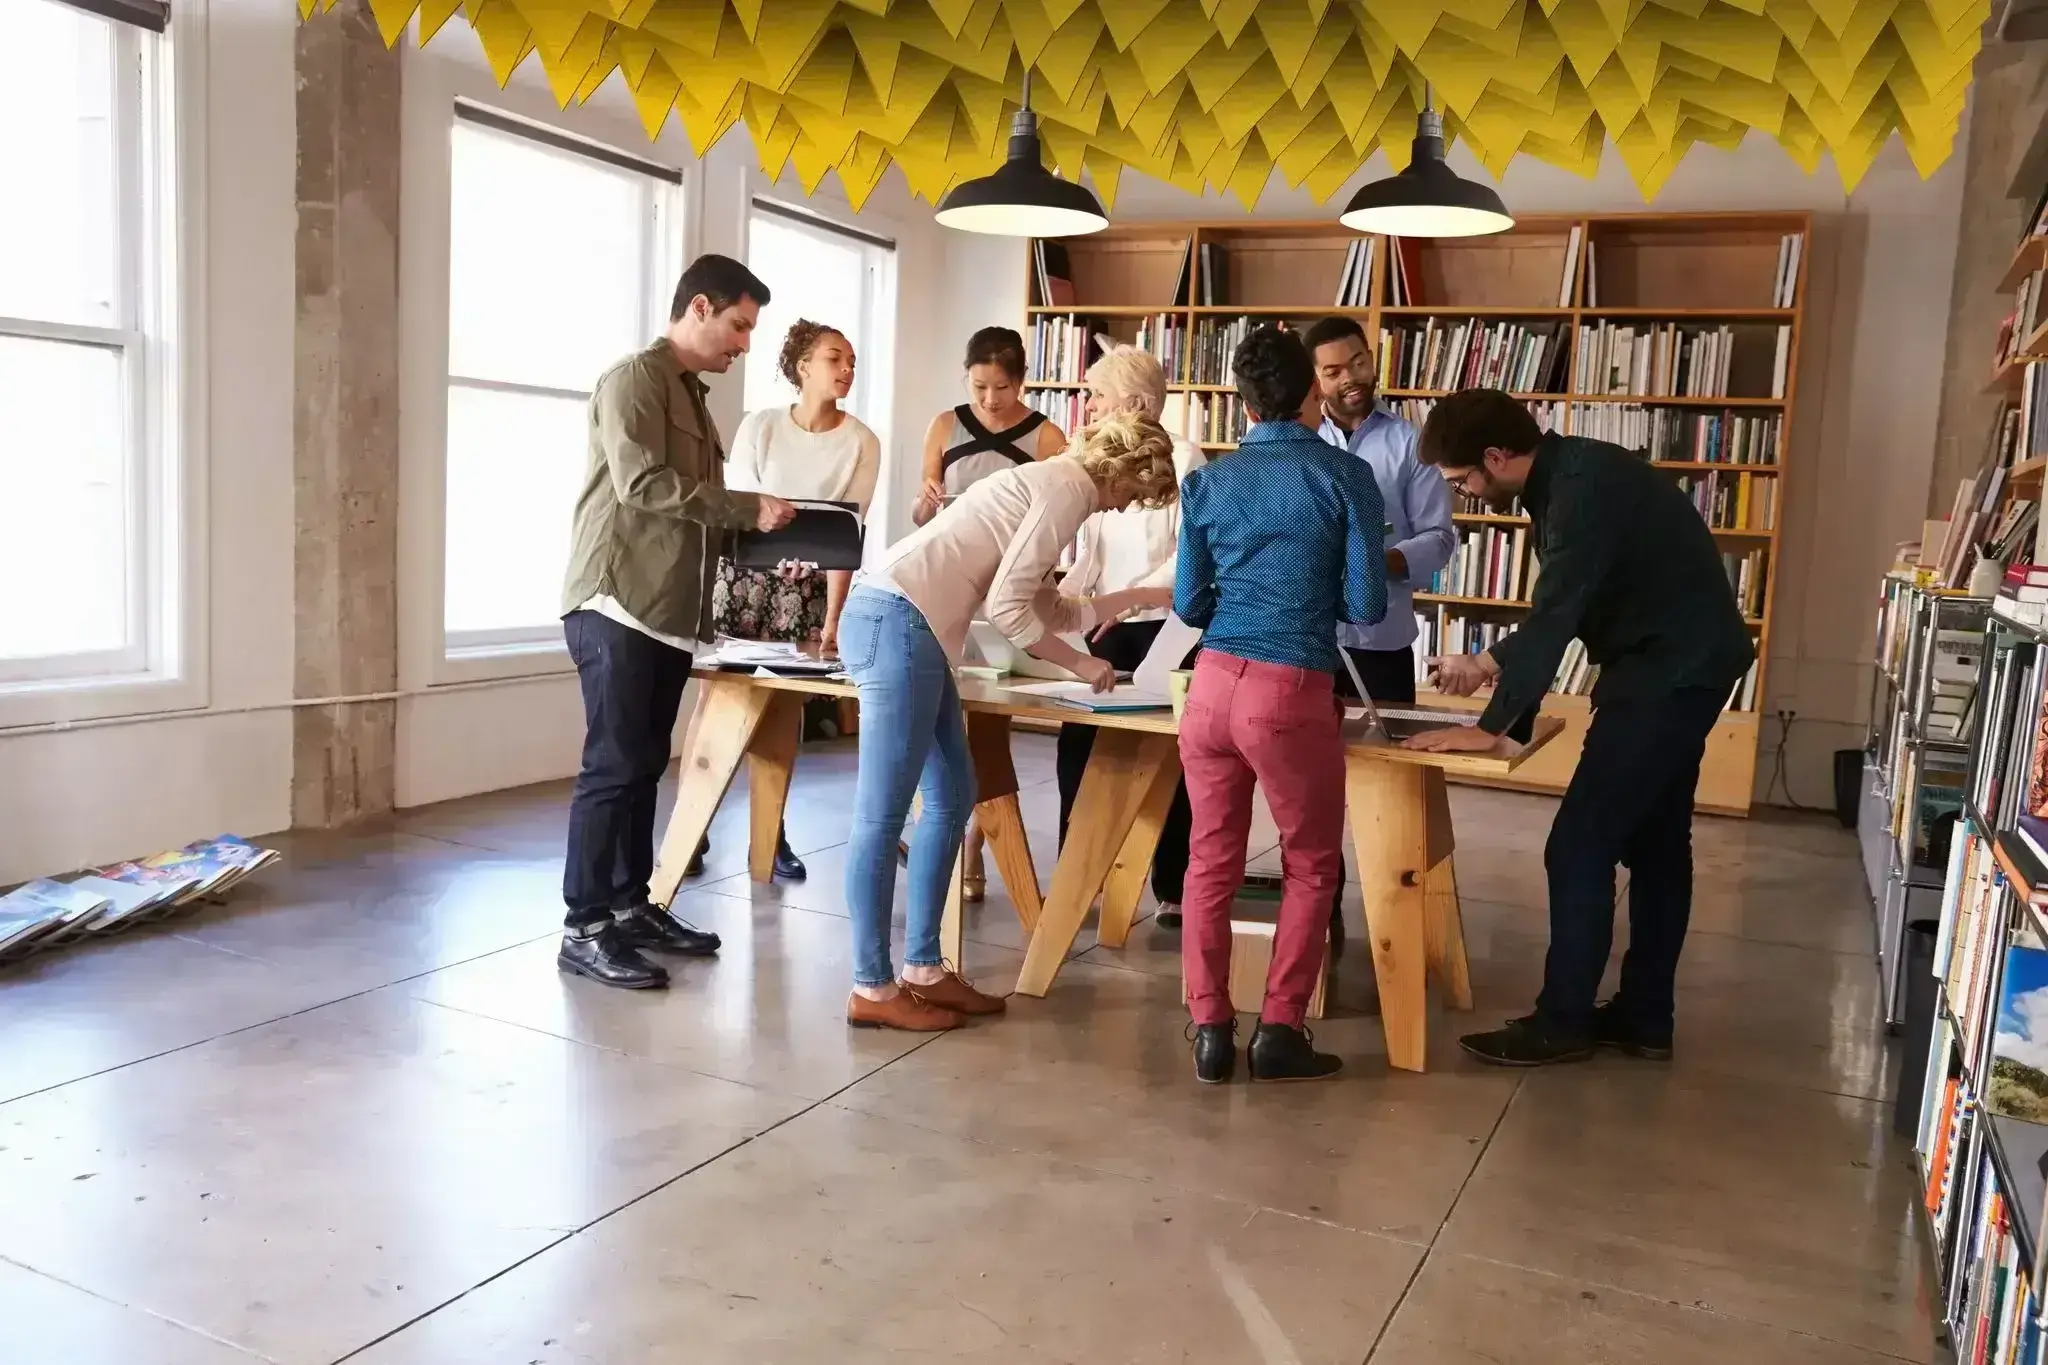 A group of people standing around a wooden table working.